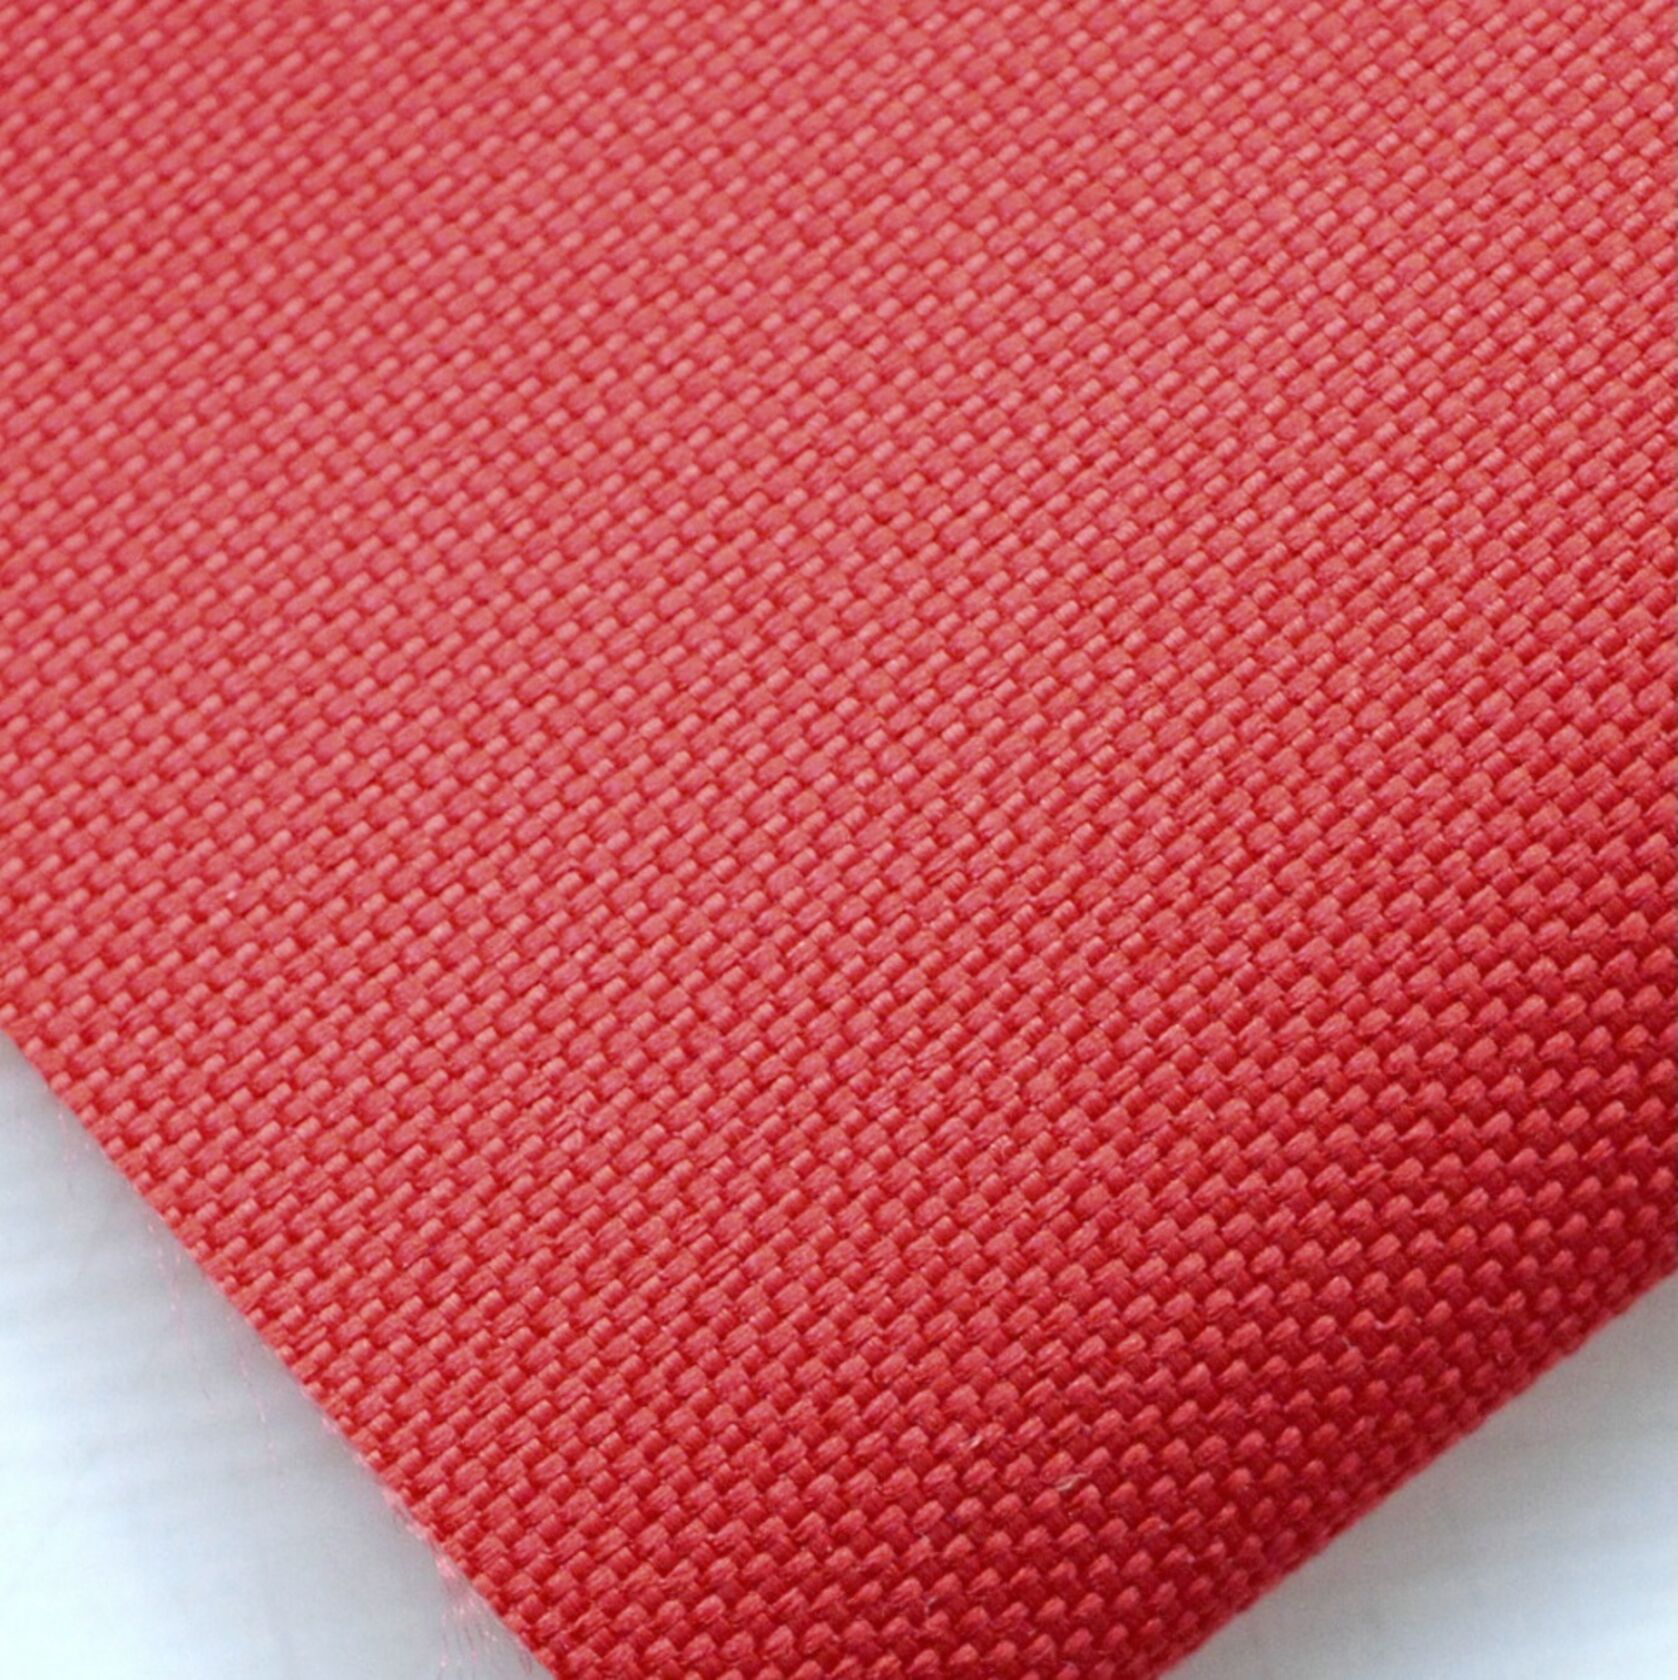 Medium PU Coated Water Resistant Canvas Fabric - Cherry Red